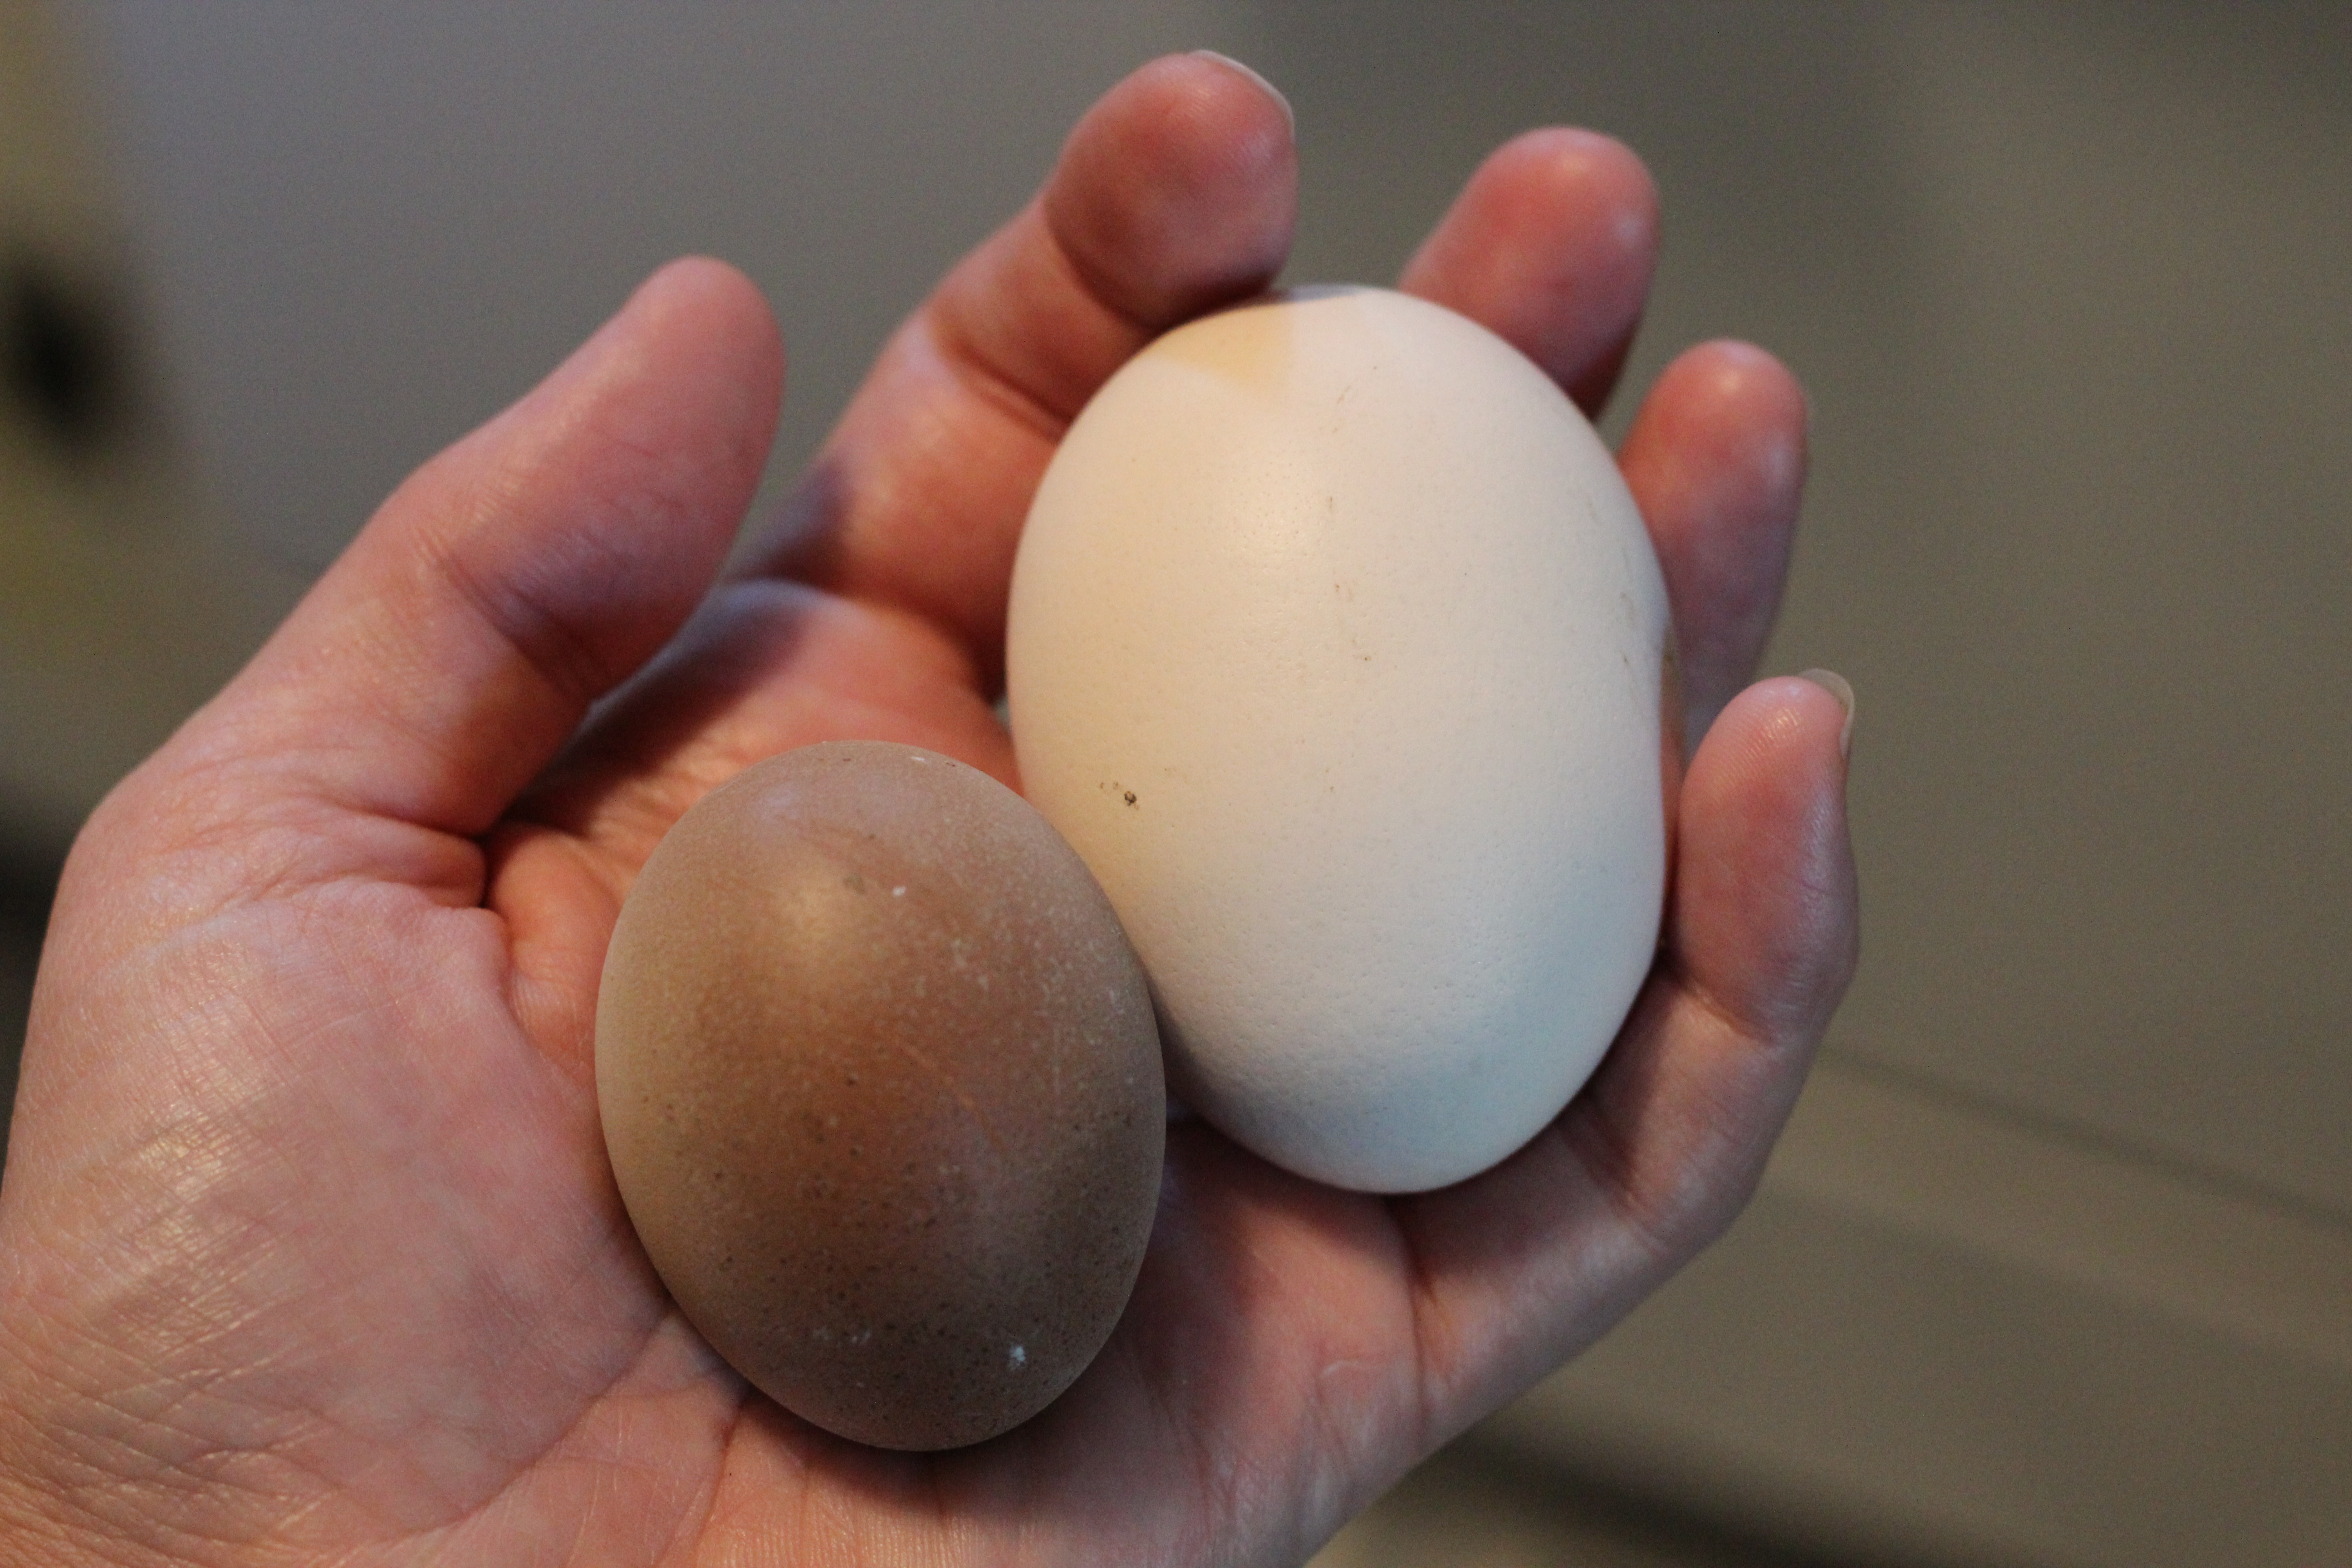 A Tetra Tint double-yolker (right) in contrast with a small Maran egg